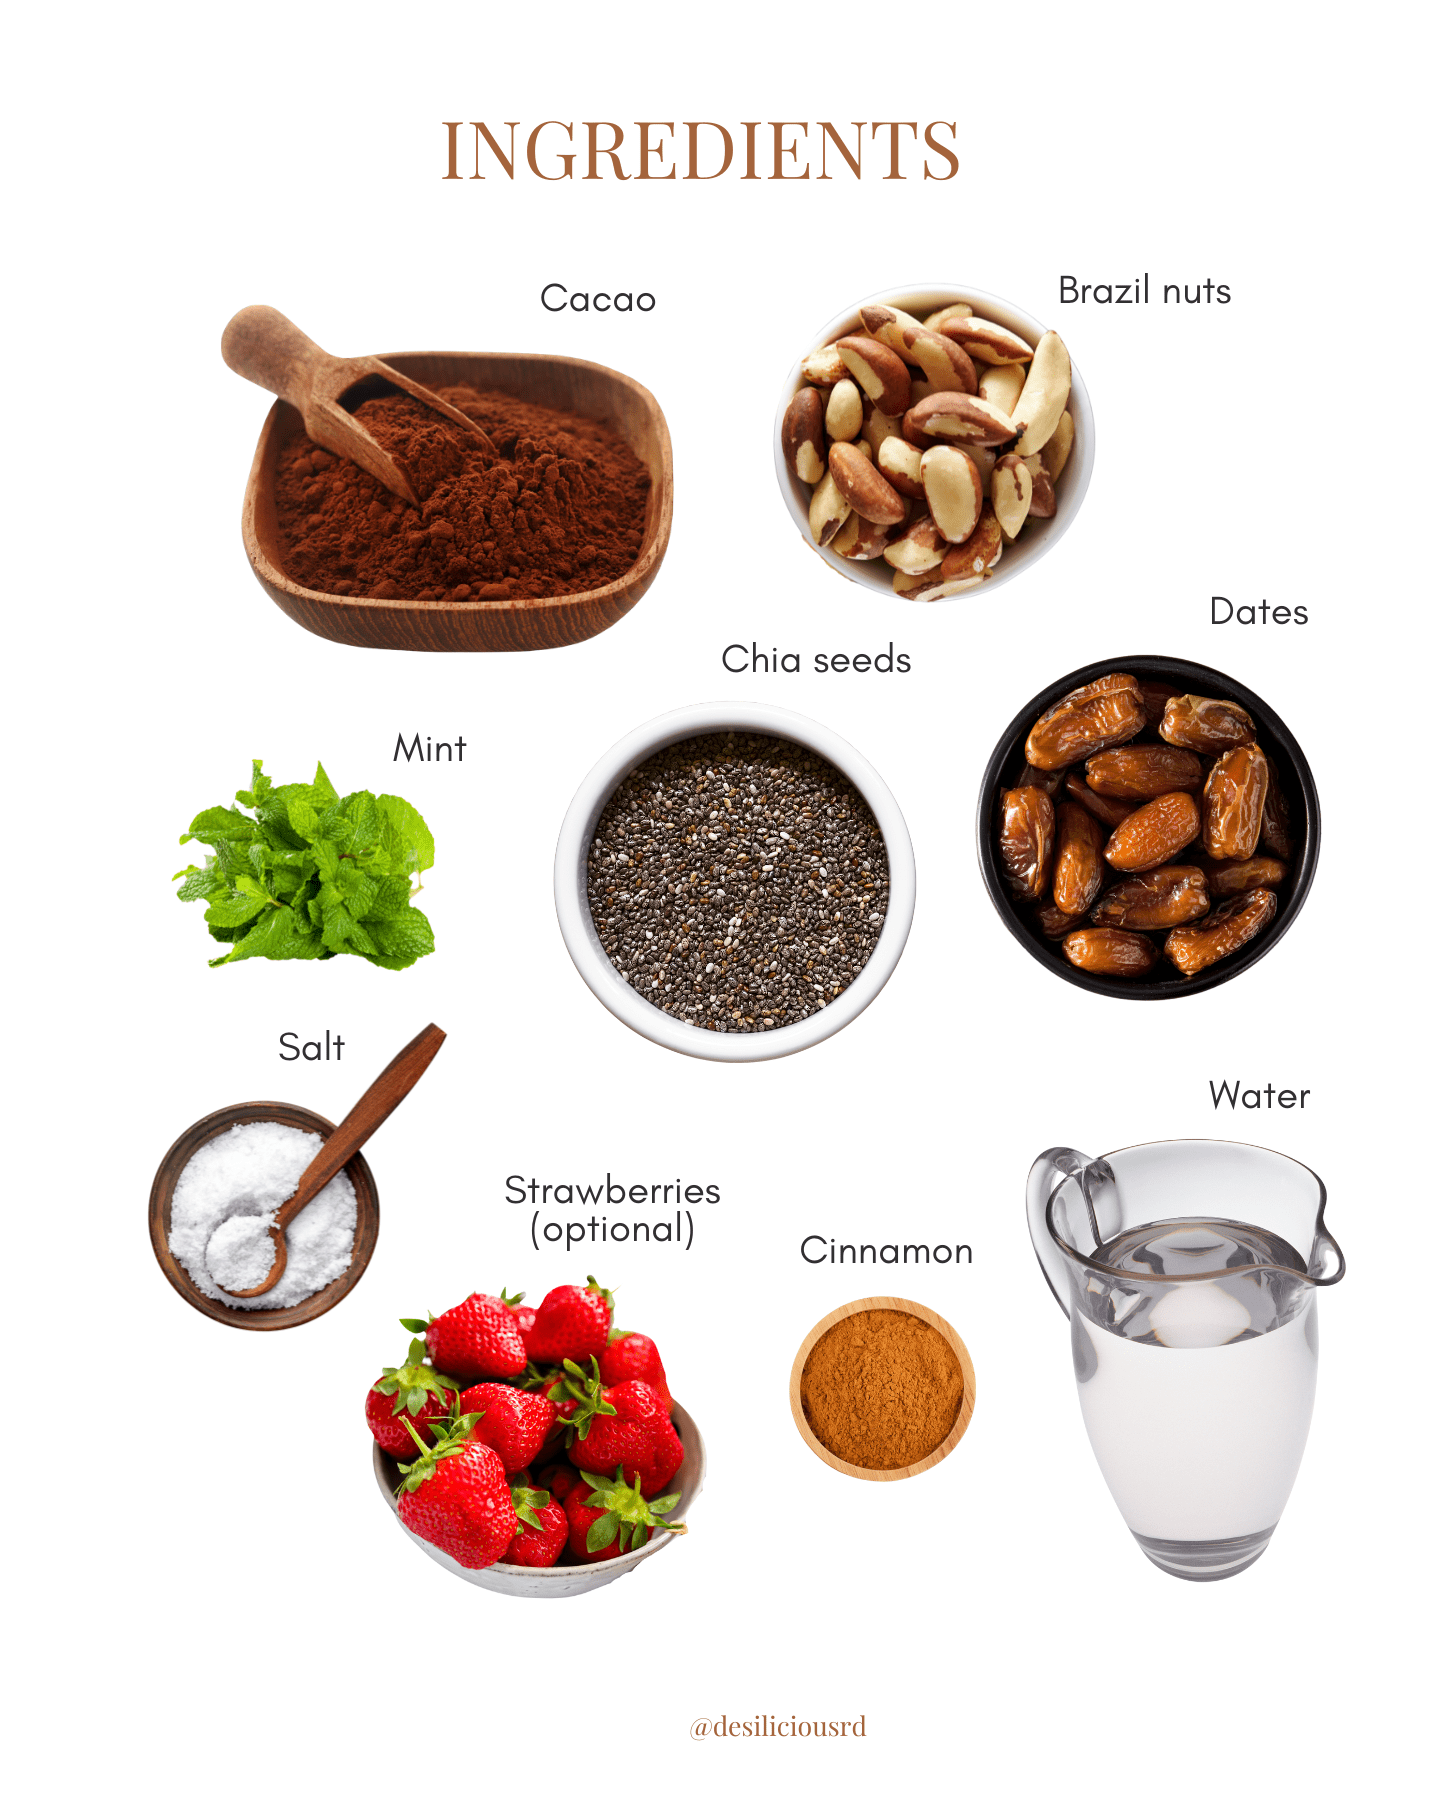 graphic showing food ingredients such as cacao, nuts, seeds, dates and berries.